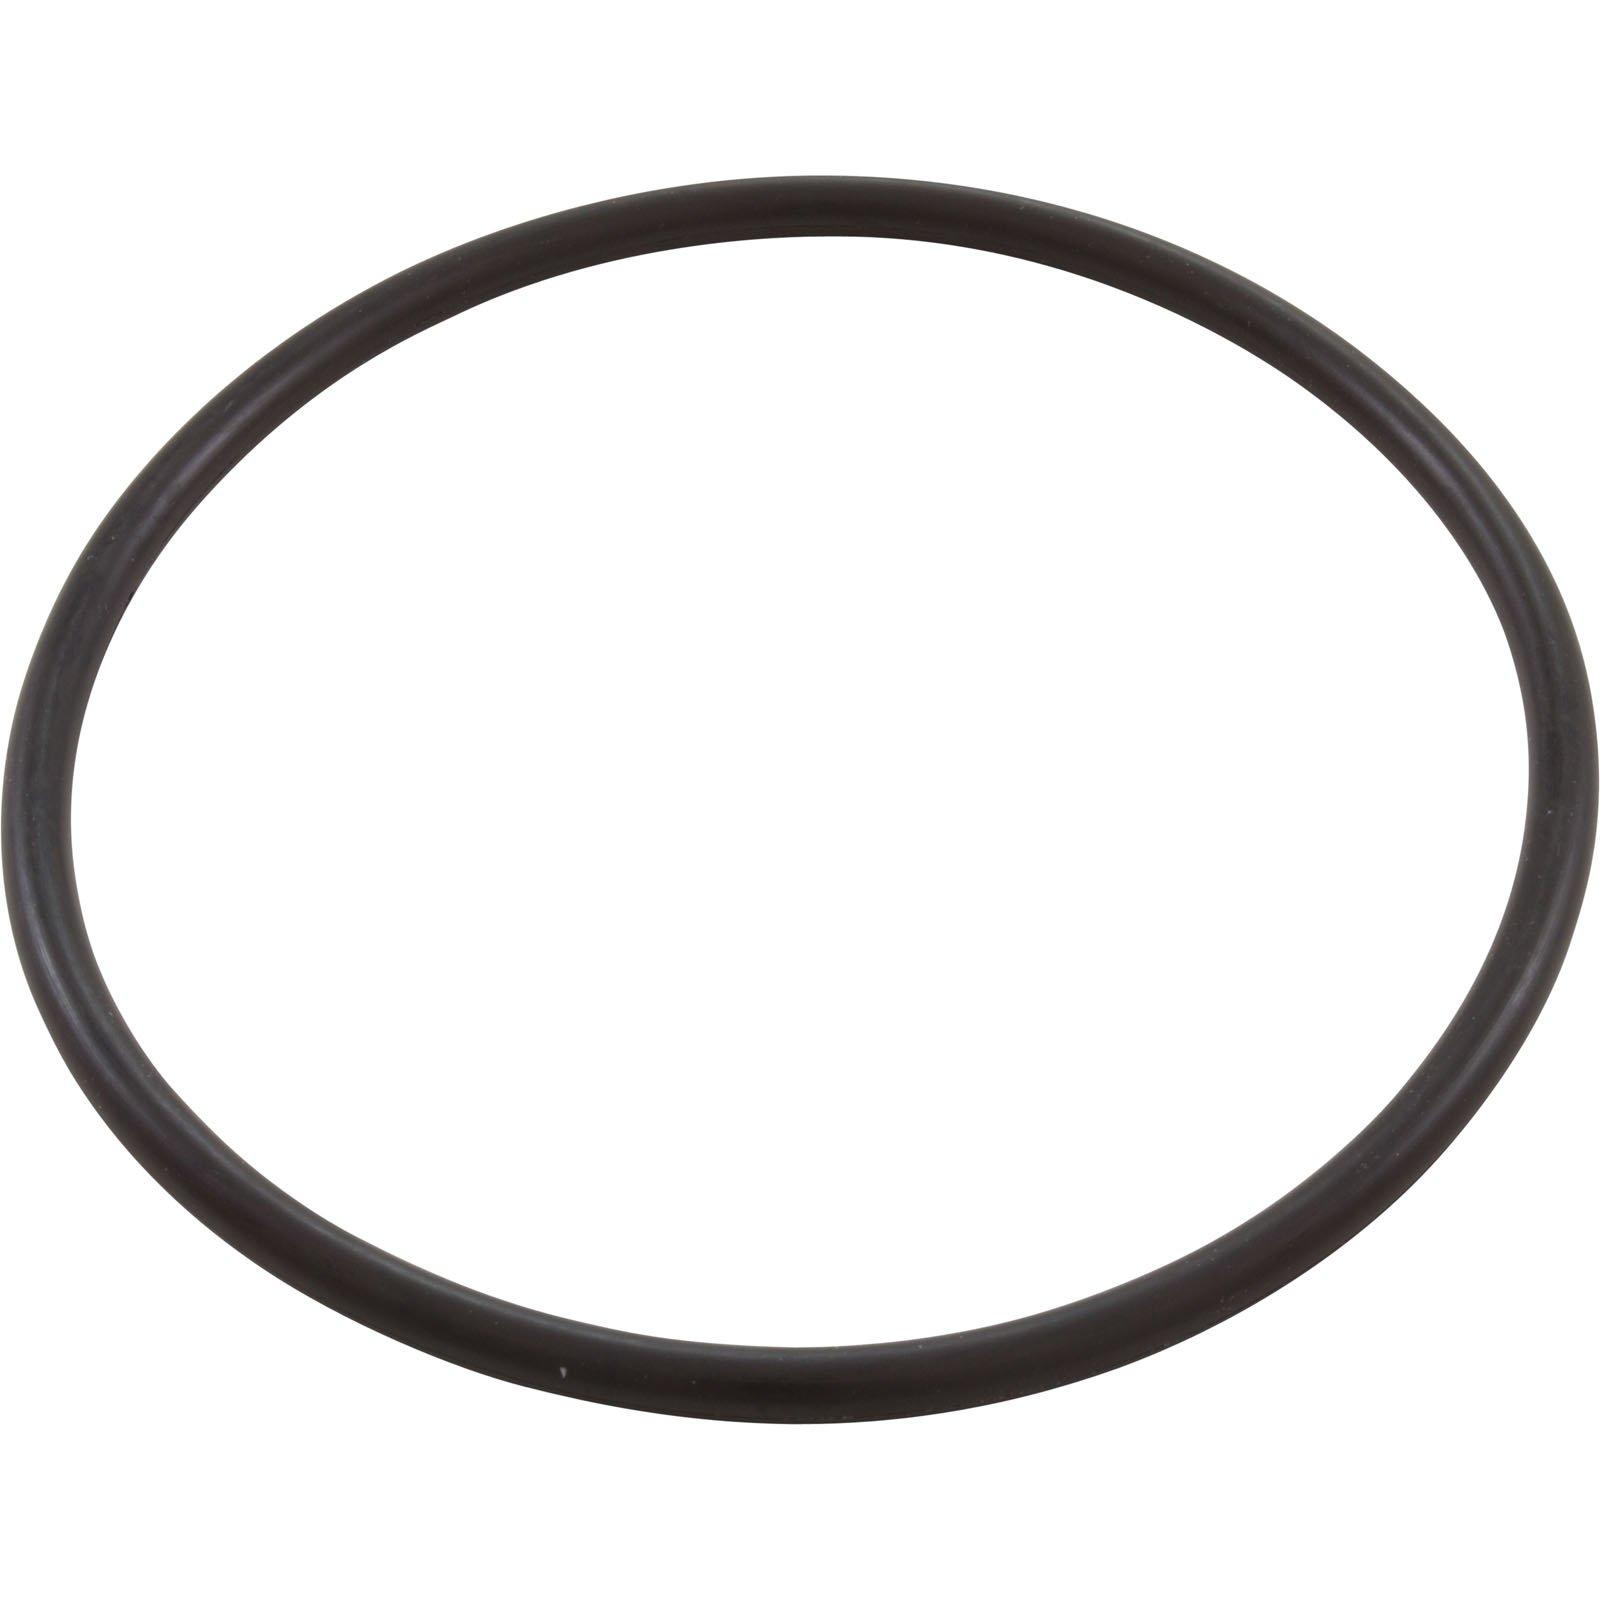 All Seals - Replacement Lid O-Ring for Pentair Whisperflo, Challenger, IntelliFlo